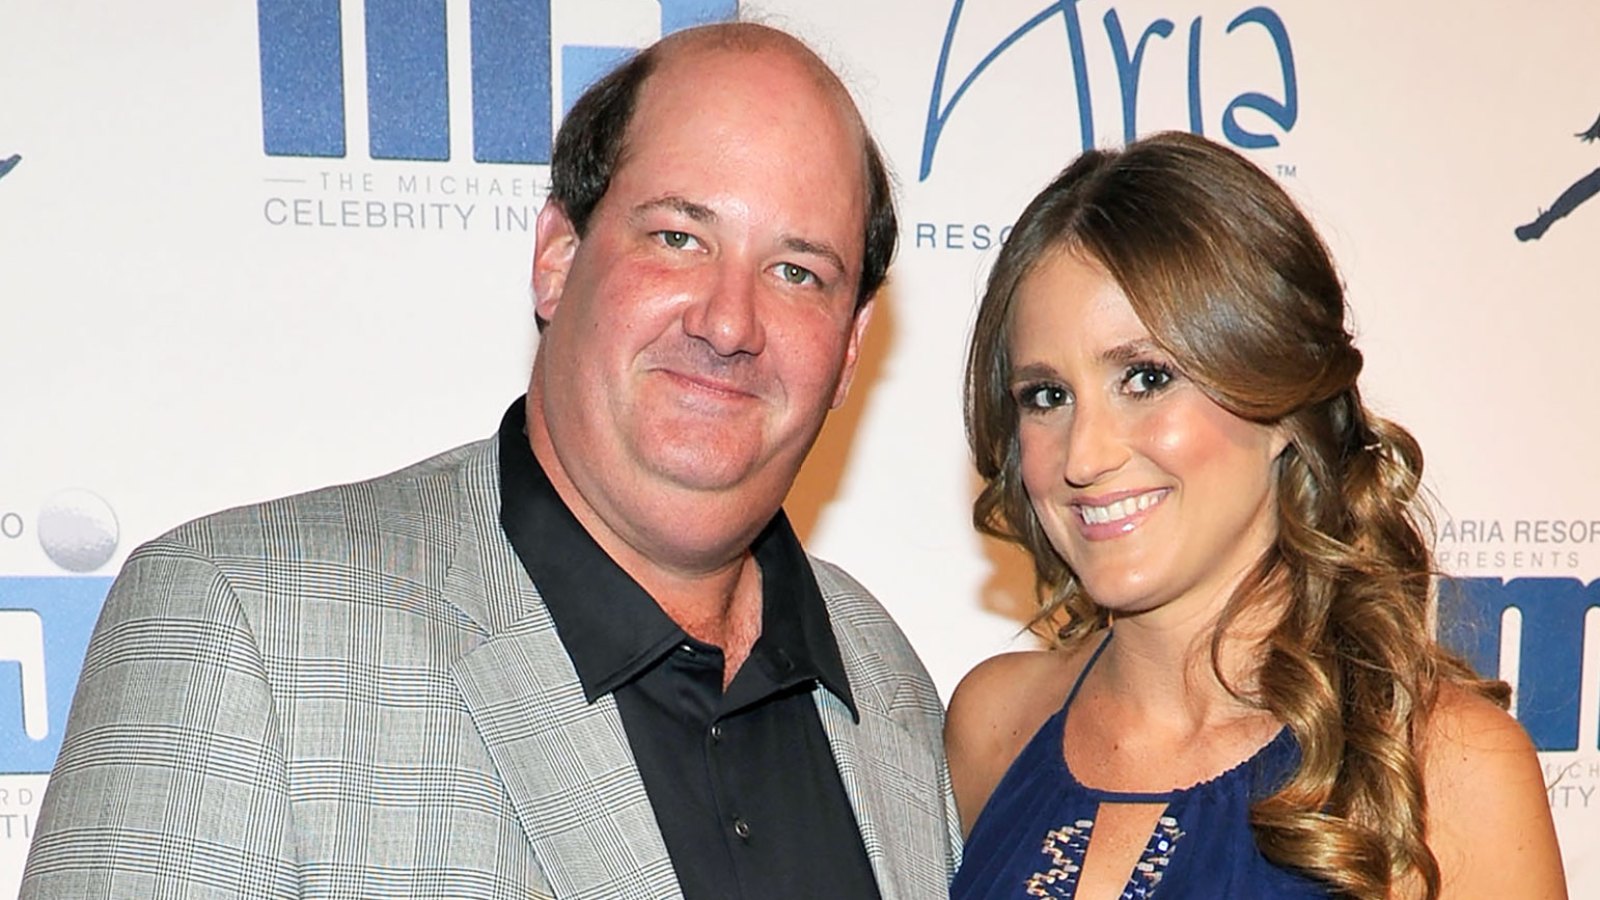 Brian-Baumgartner-Welcomes-First-Child-With-Wife-Celeste-See-The-Office-Alums-Announcement-of-Baby-Girl-Brian-Baumgartner-and-Celeste-Ackelson